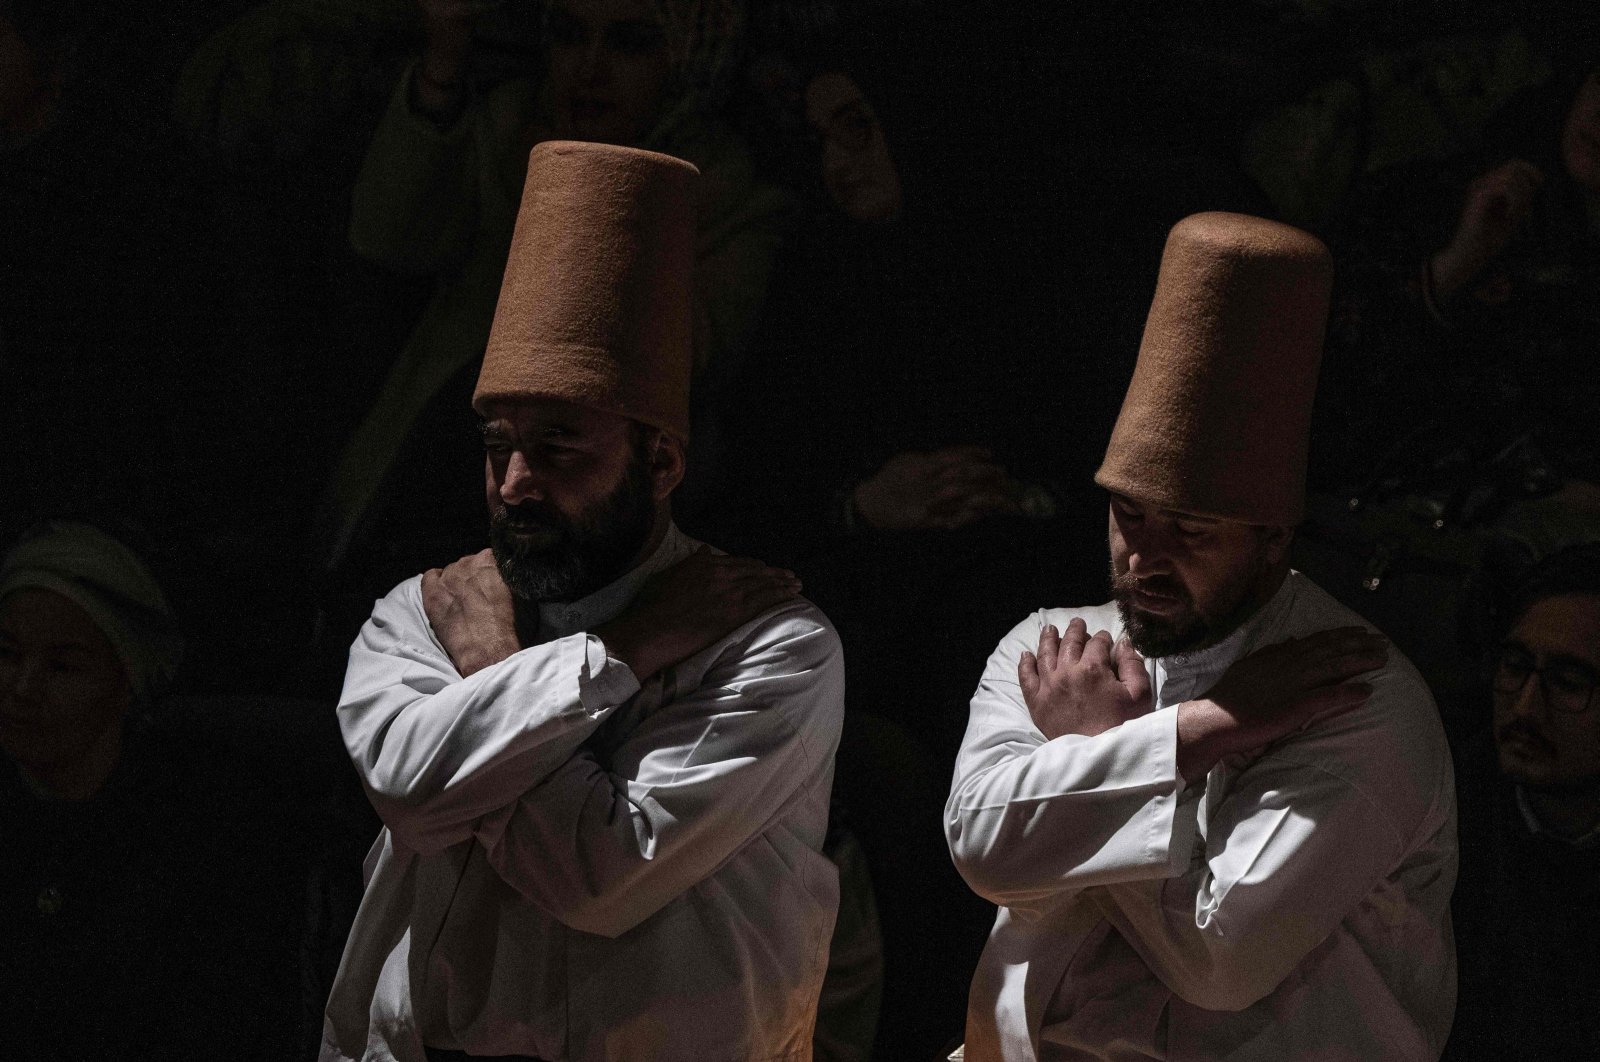 Whirling dervishes, wearing the symbolic hat &quot;sikke&quot;, perform the &quot;Sema&quot; ritual as part of a ceremony to celebrate the 750th anniversary of the death of Mevlana Jalaluddin Rumi, 13th-century Islamic poet, scholar, and Sufi mystic, at Mevlana Cultural Center in Konya, Türkiye, Dec. 17, 2023. (AFP Photo)